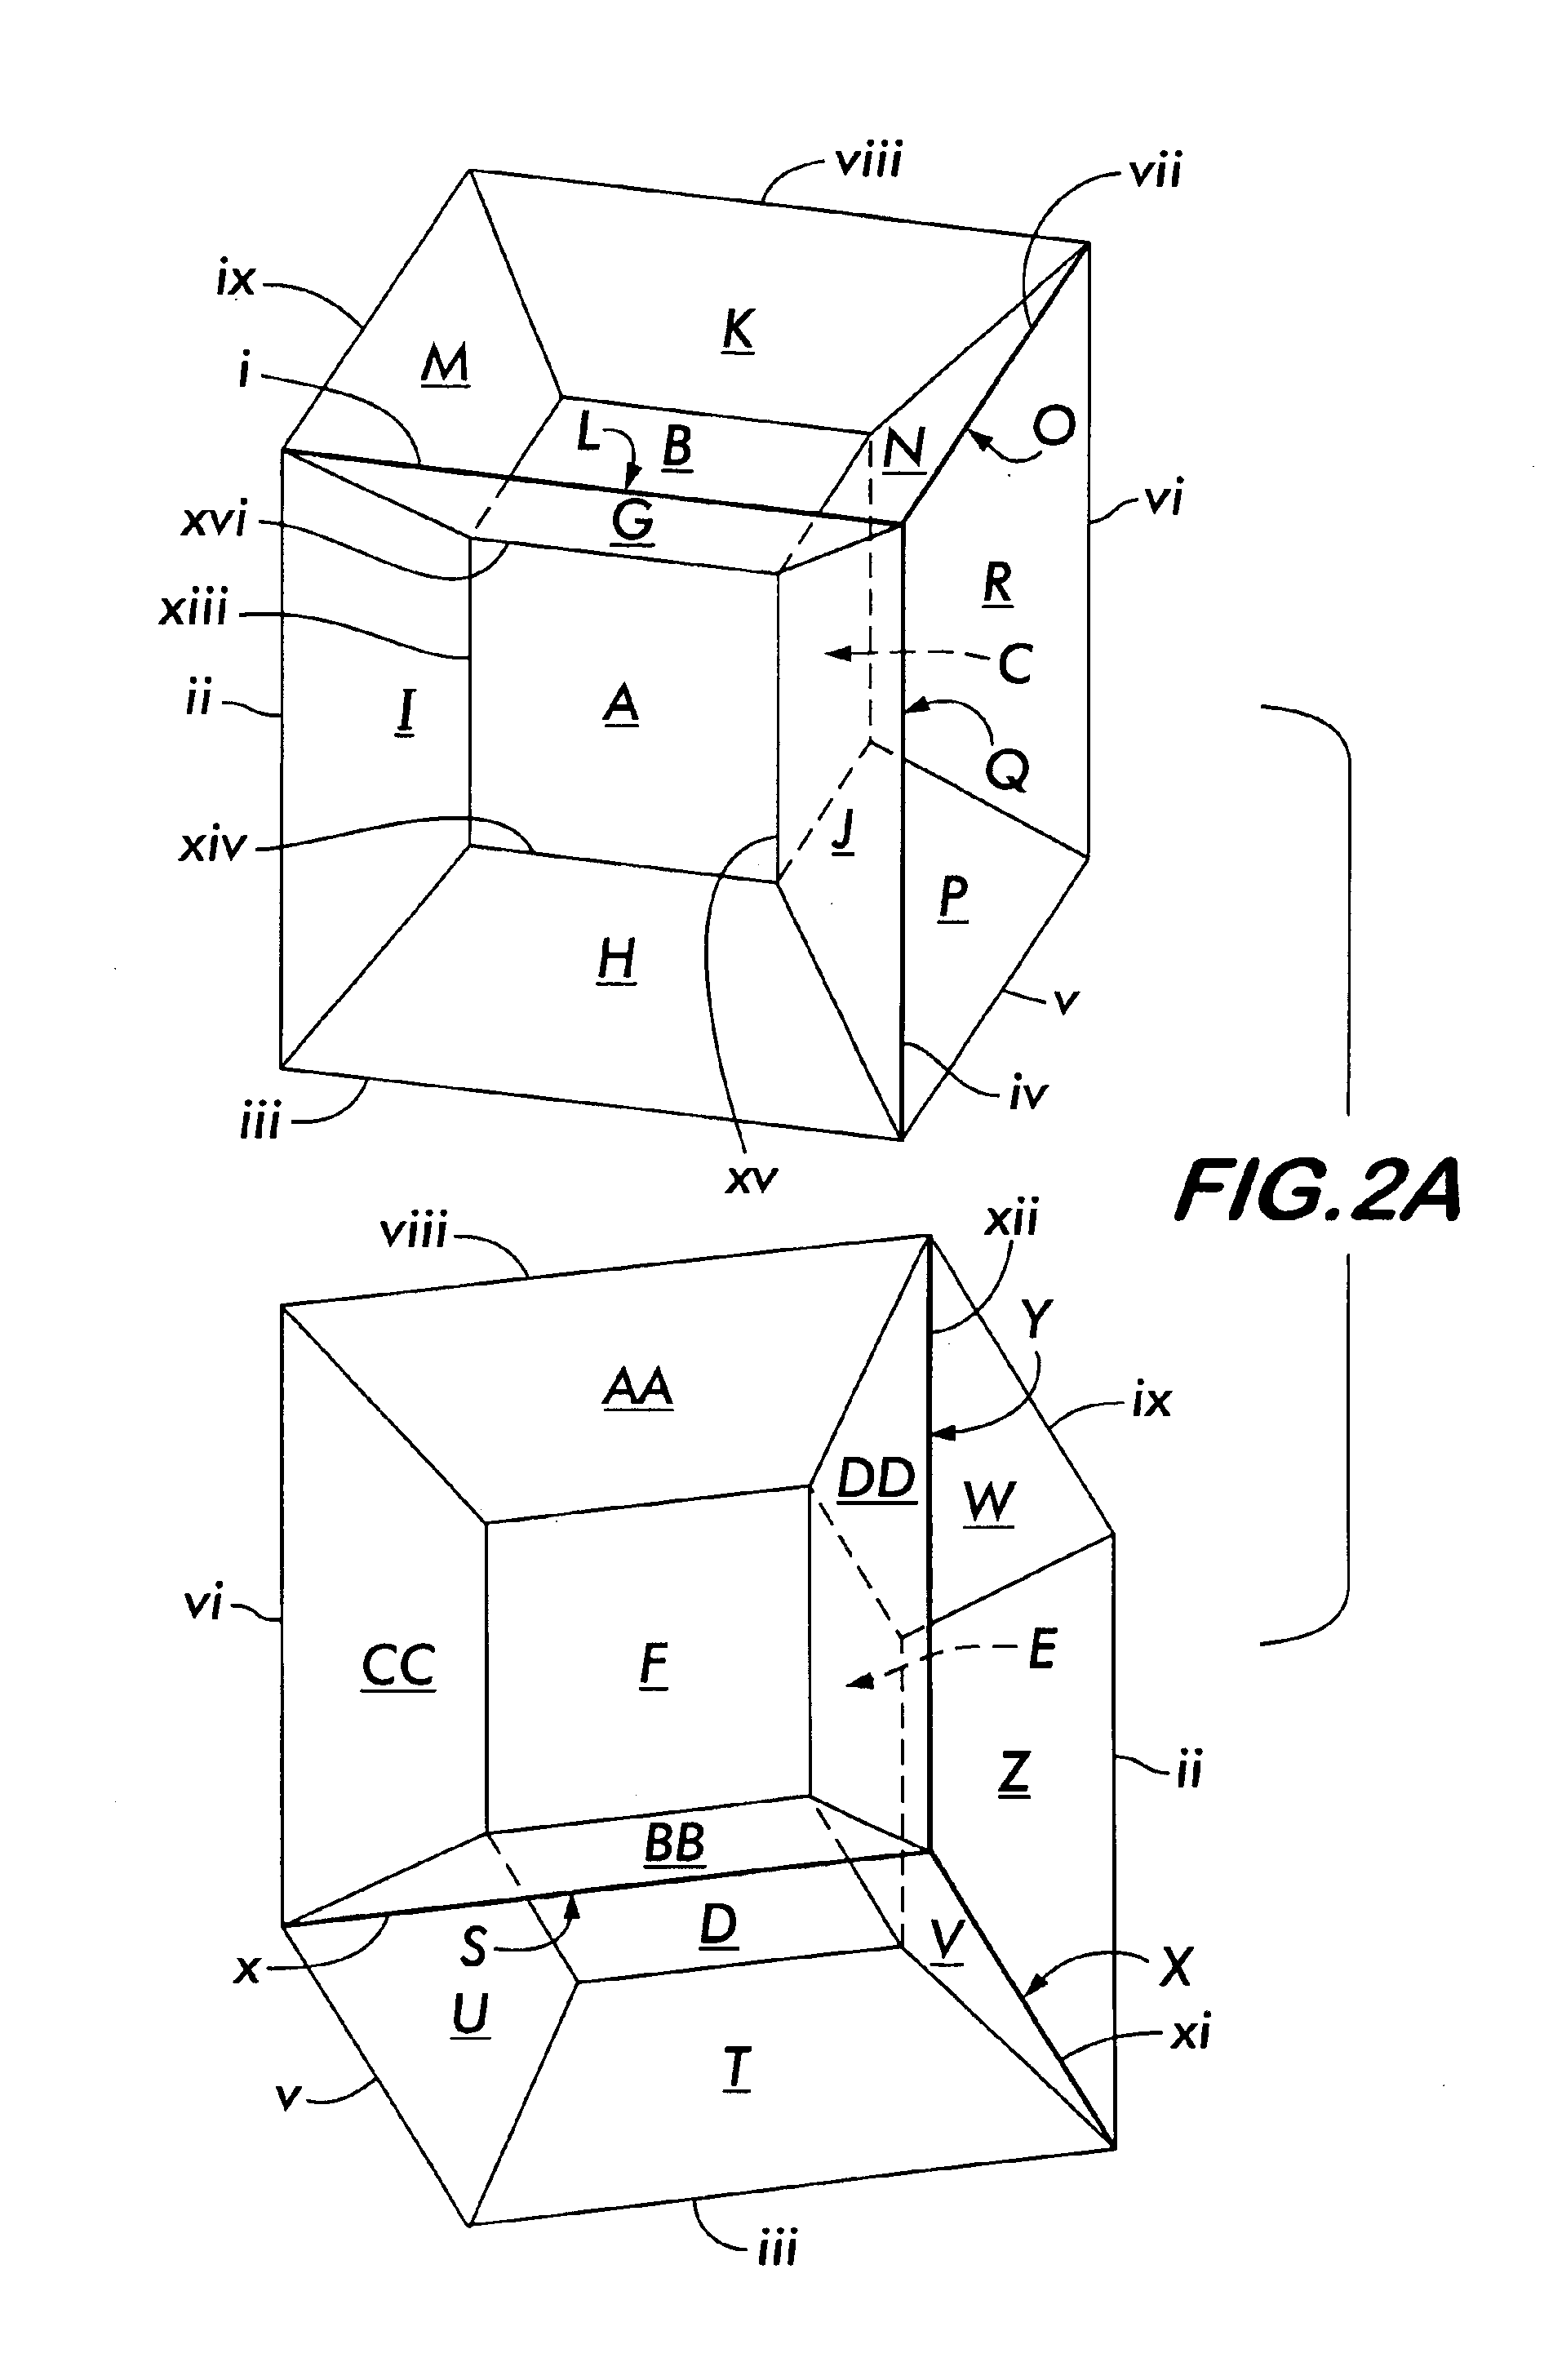 Method and apparatus for three dimensional internet and computer file interface